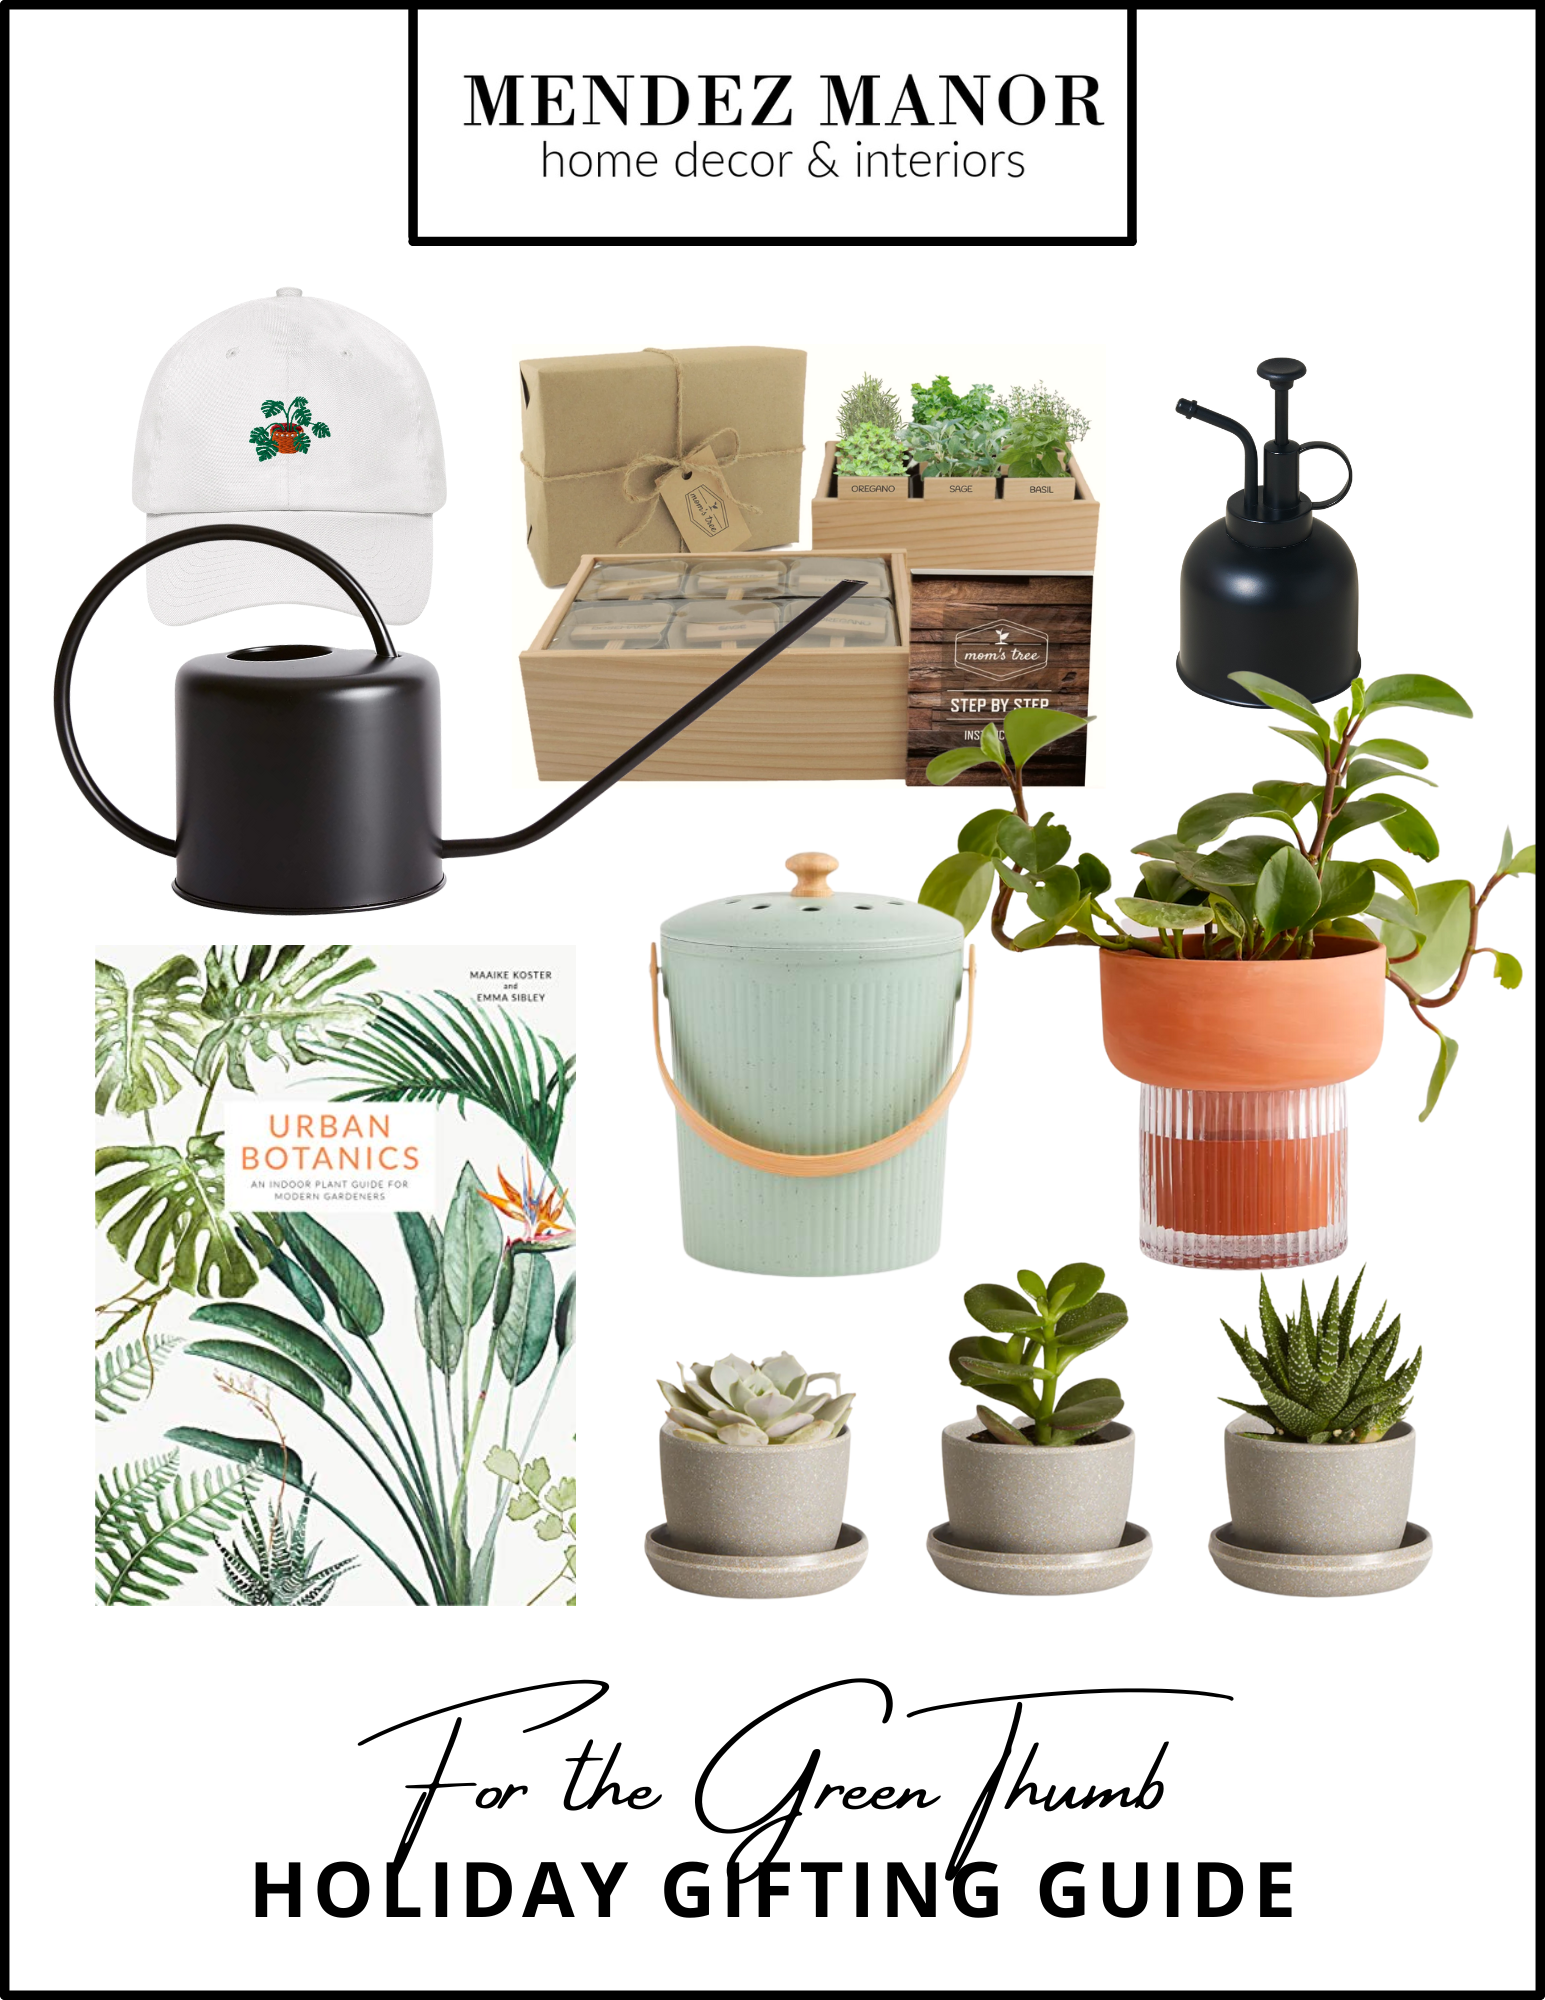 Holiday Gifting Guide - Gifts for the Green Thumb